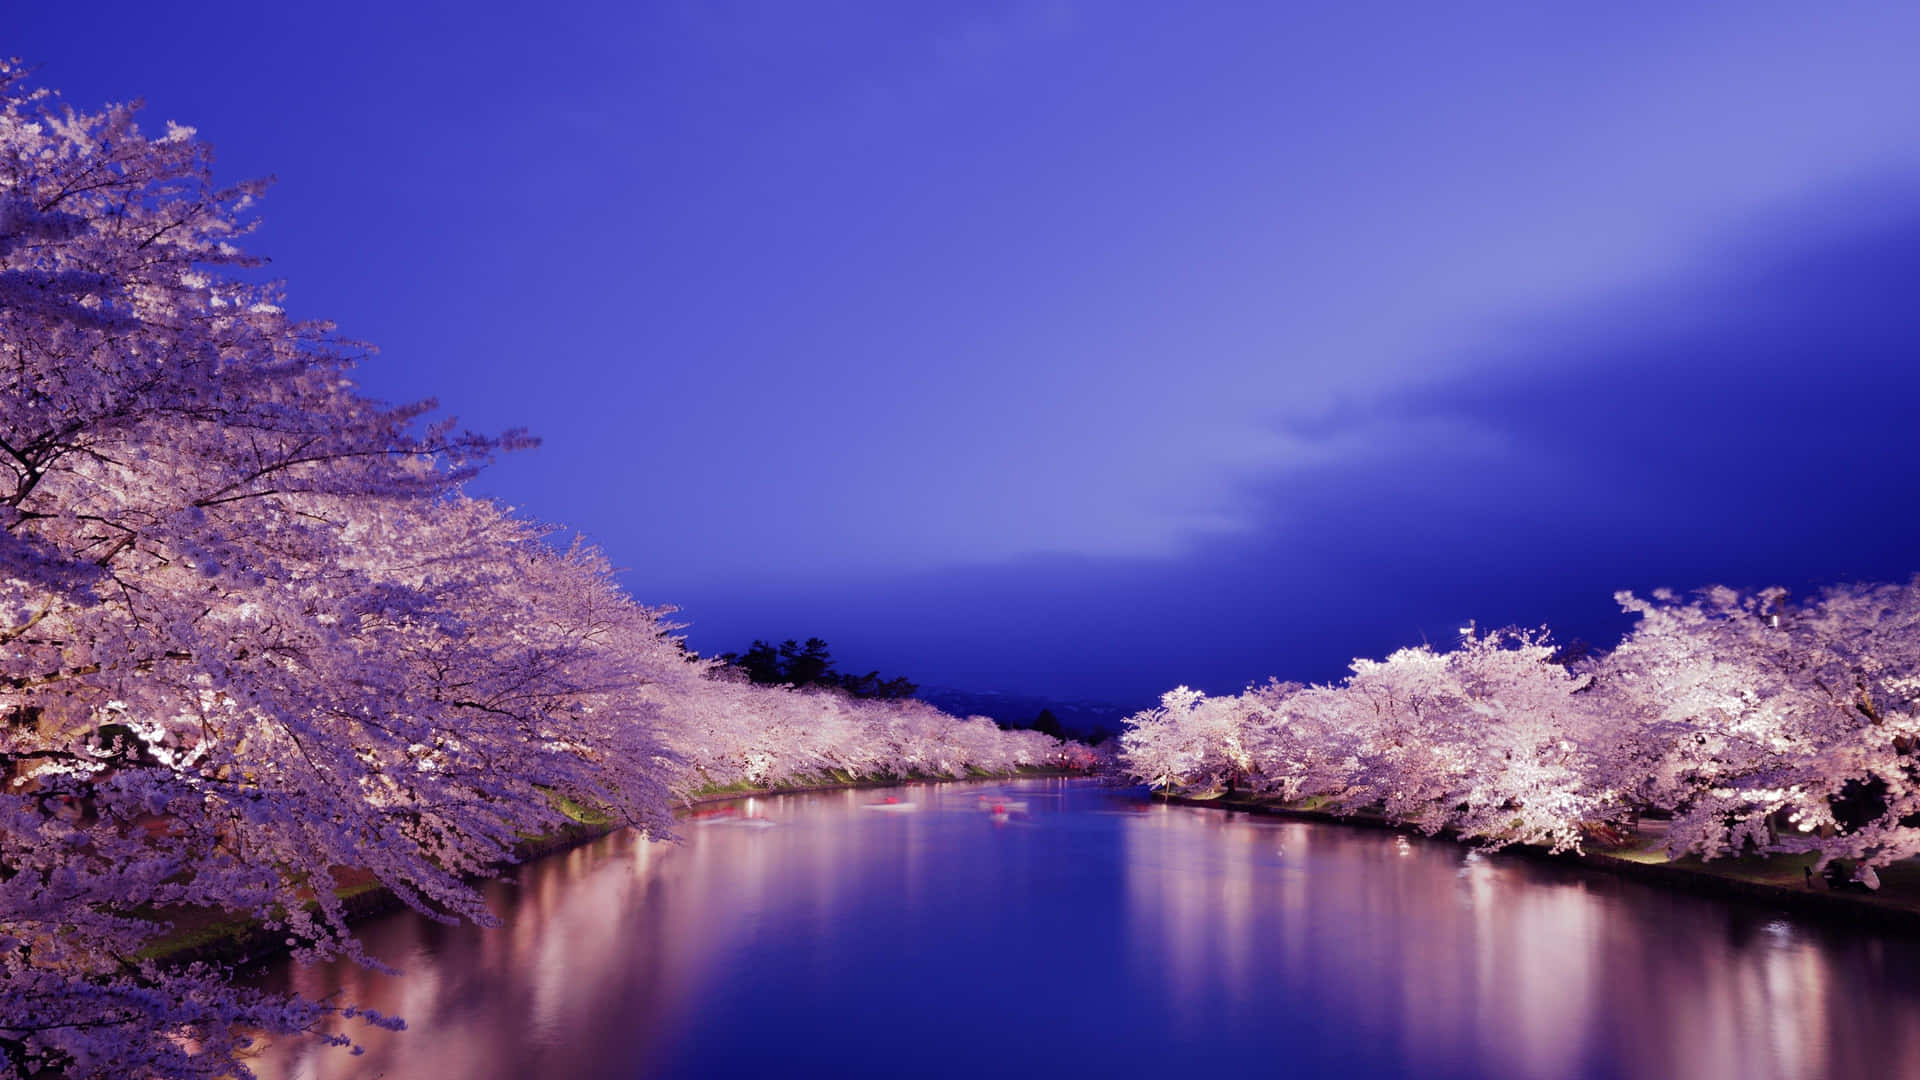 Enjoy the magical, peaceful atmosphere of night time Cherry Blossom Wallpaper